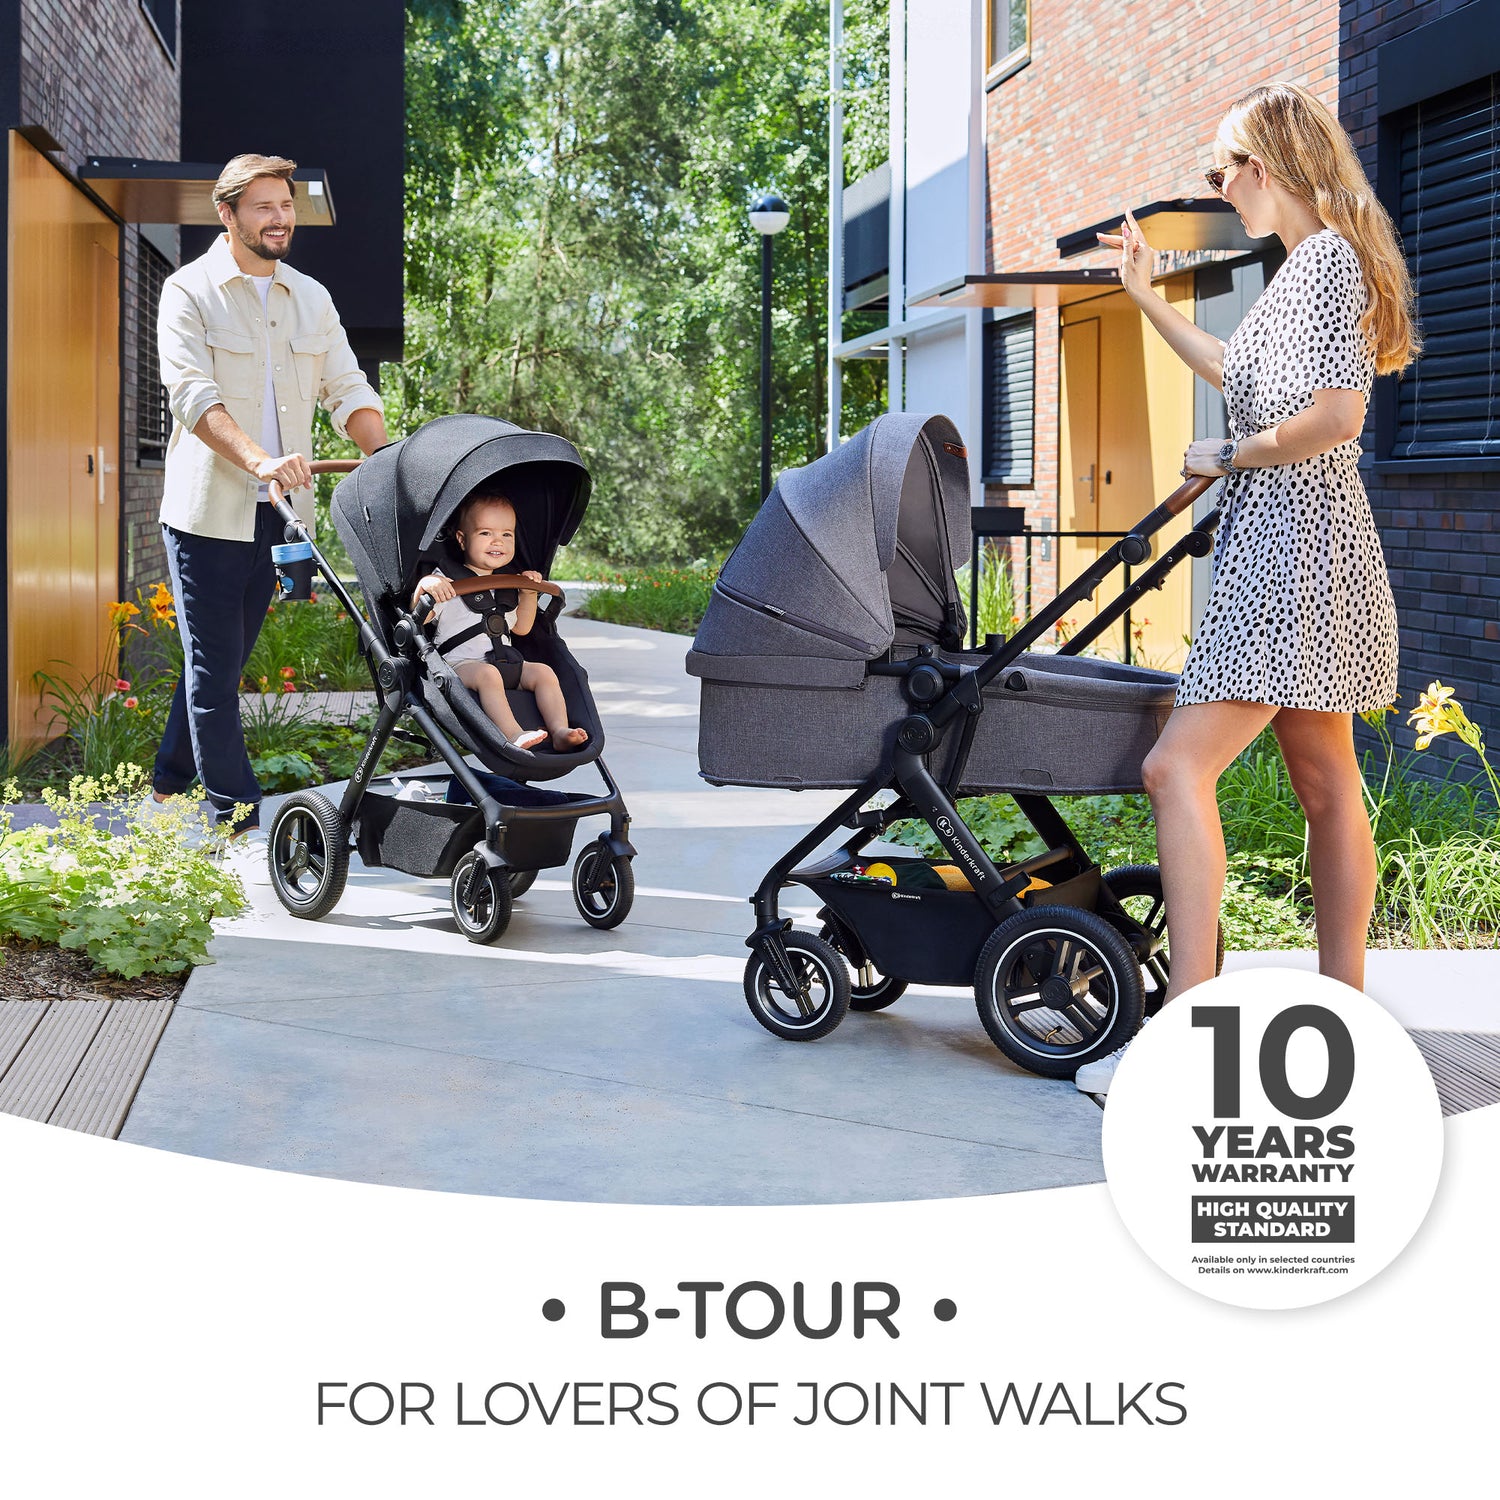 Parents with Kinderkraft Travel System B-TOUR 3 IN 1 on sunny day